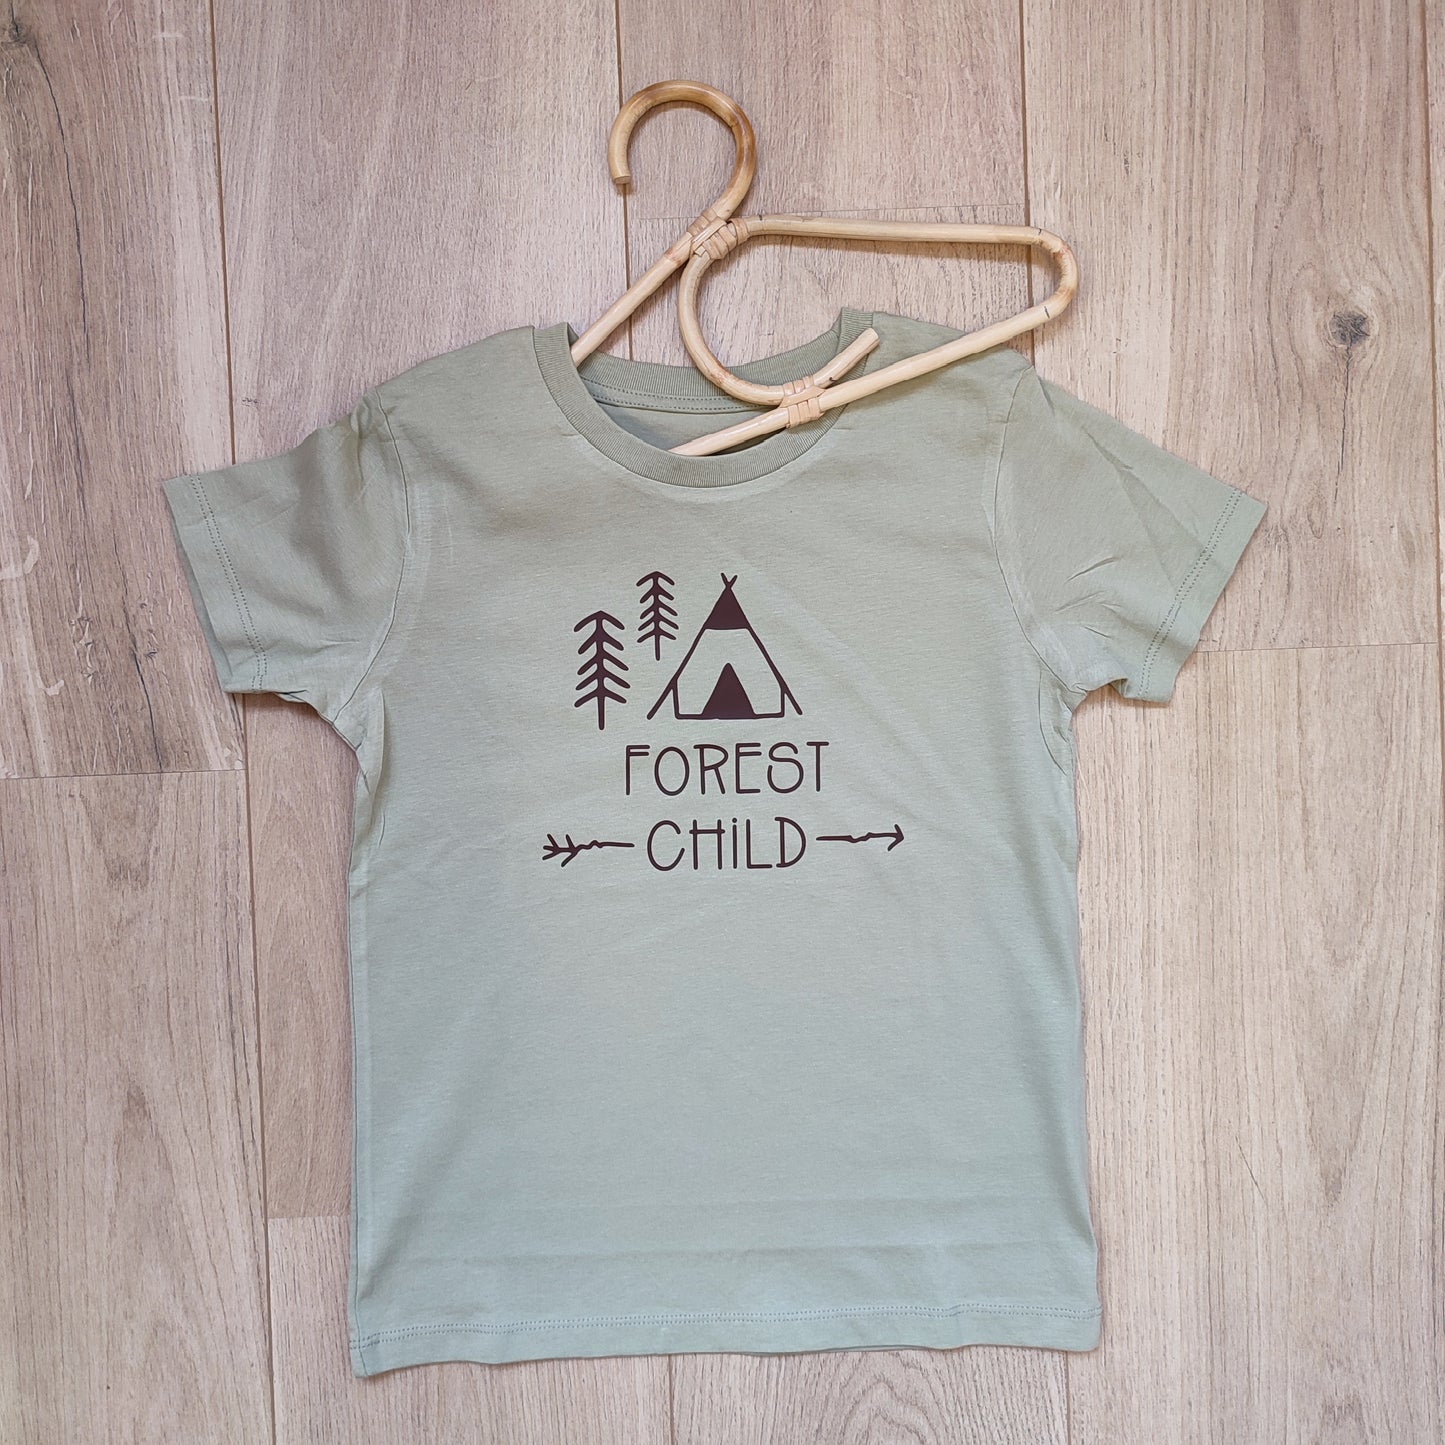 T-shirt "Forest child"